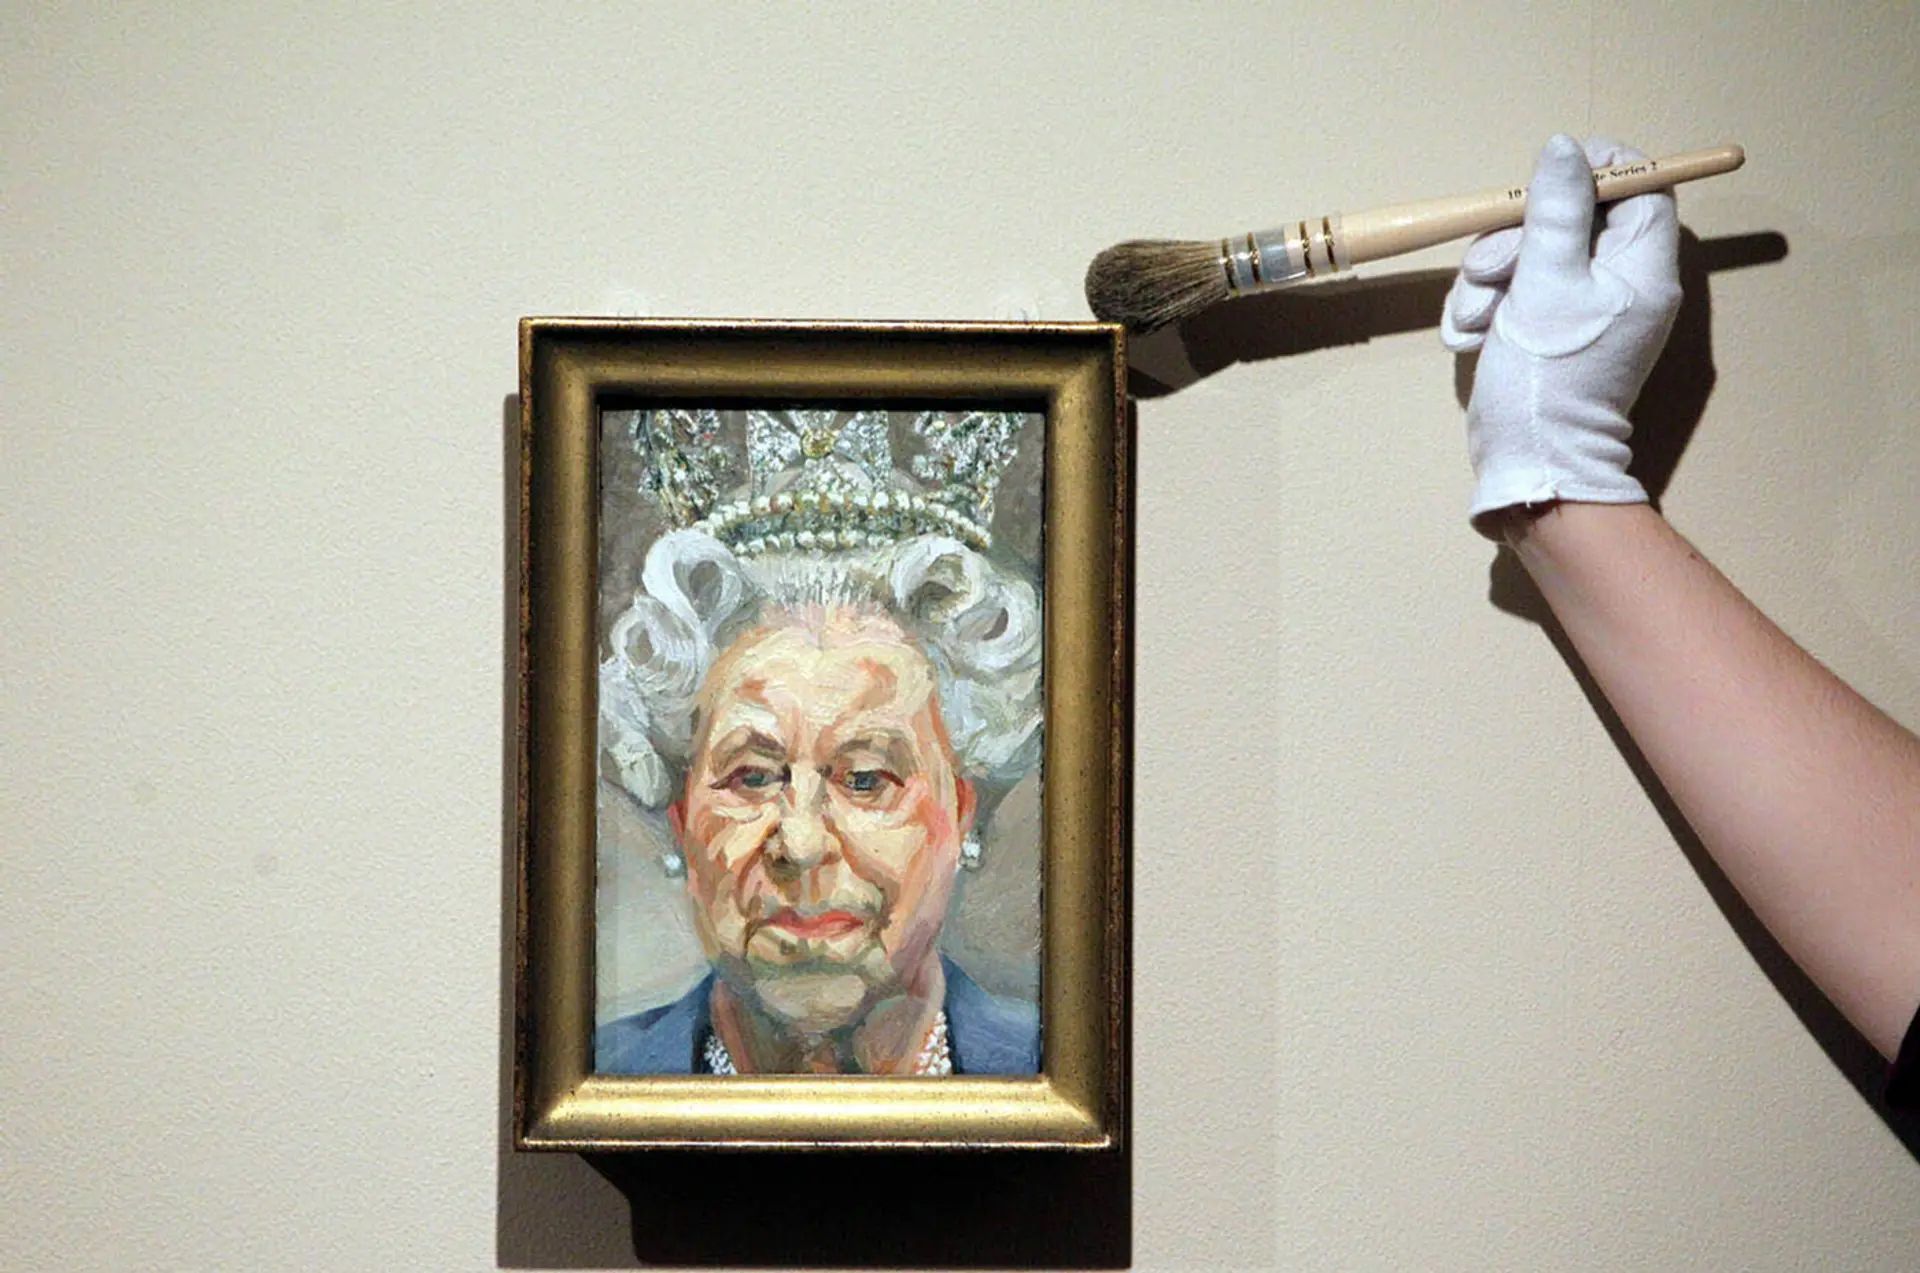 Lucian Freud, Queen Elizabeth II (2001, Royal Collection Trust), oil on canvas, on display at The Queen: Portraits of a Monarch, at Windsor Castle 

© Royal Collection Trust. Installation: PA Images/Alamy Stock Photo